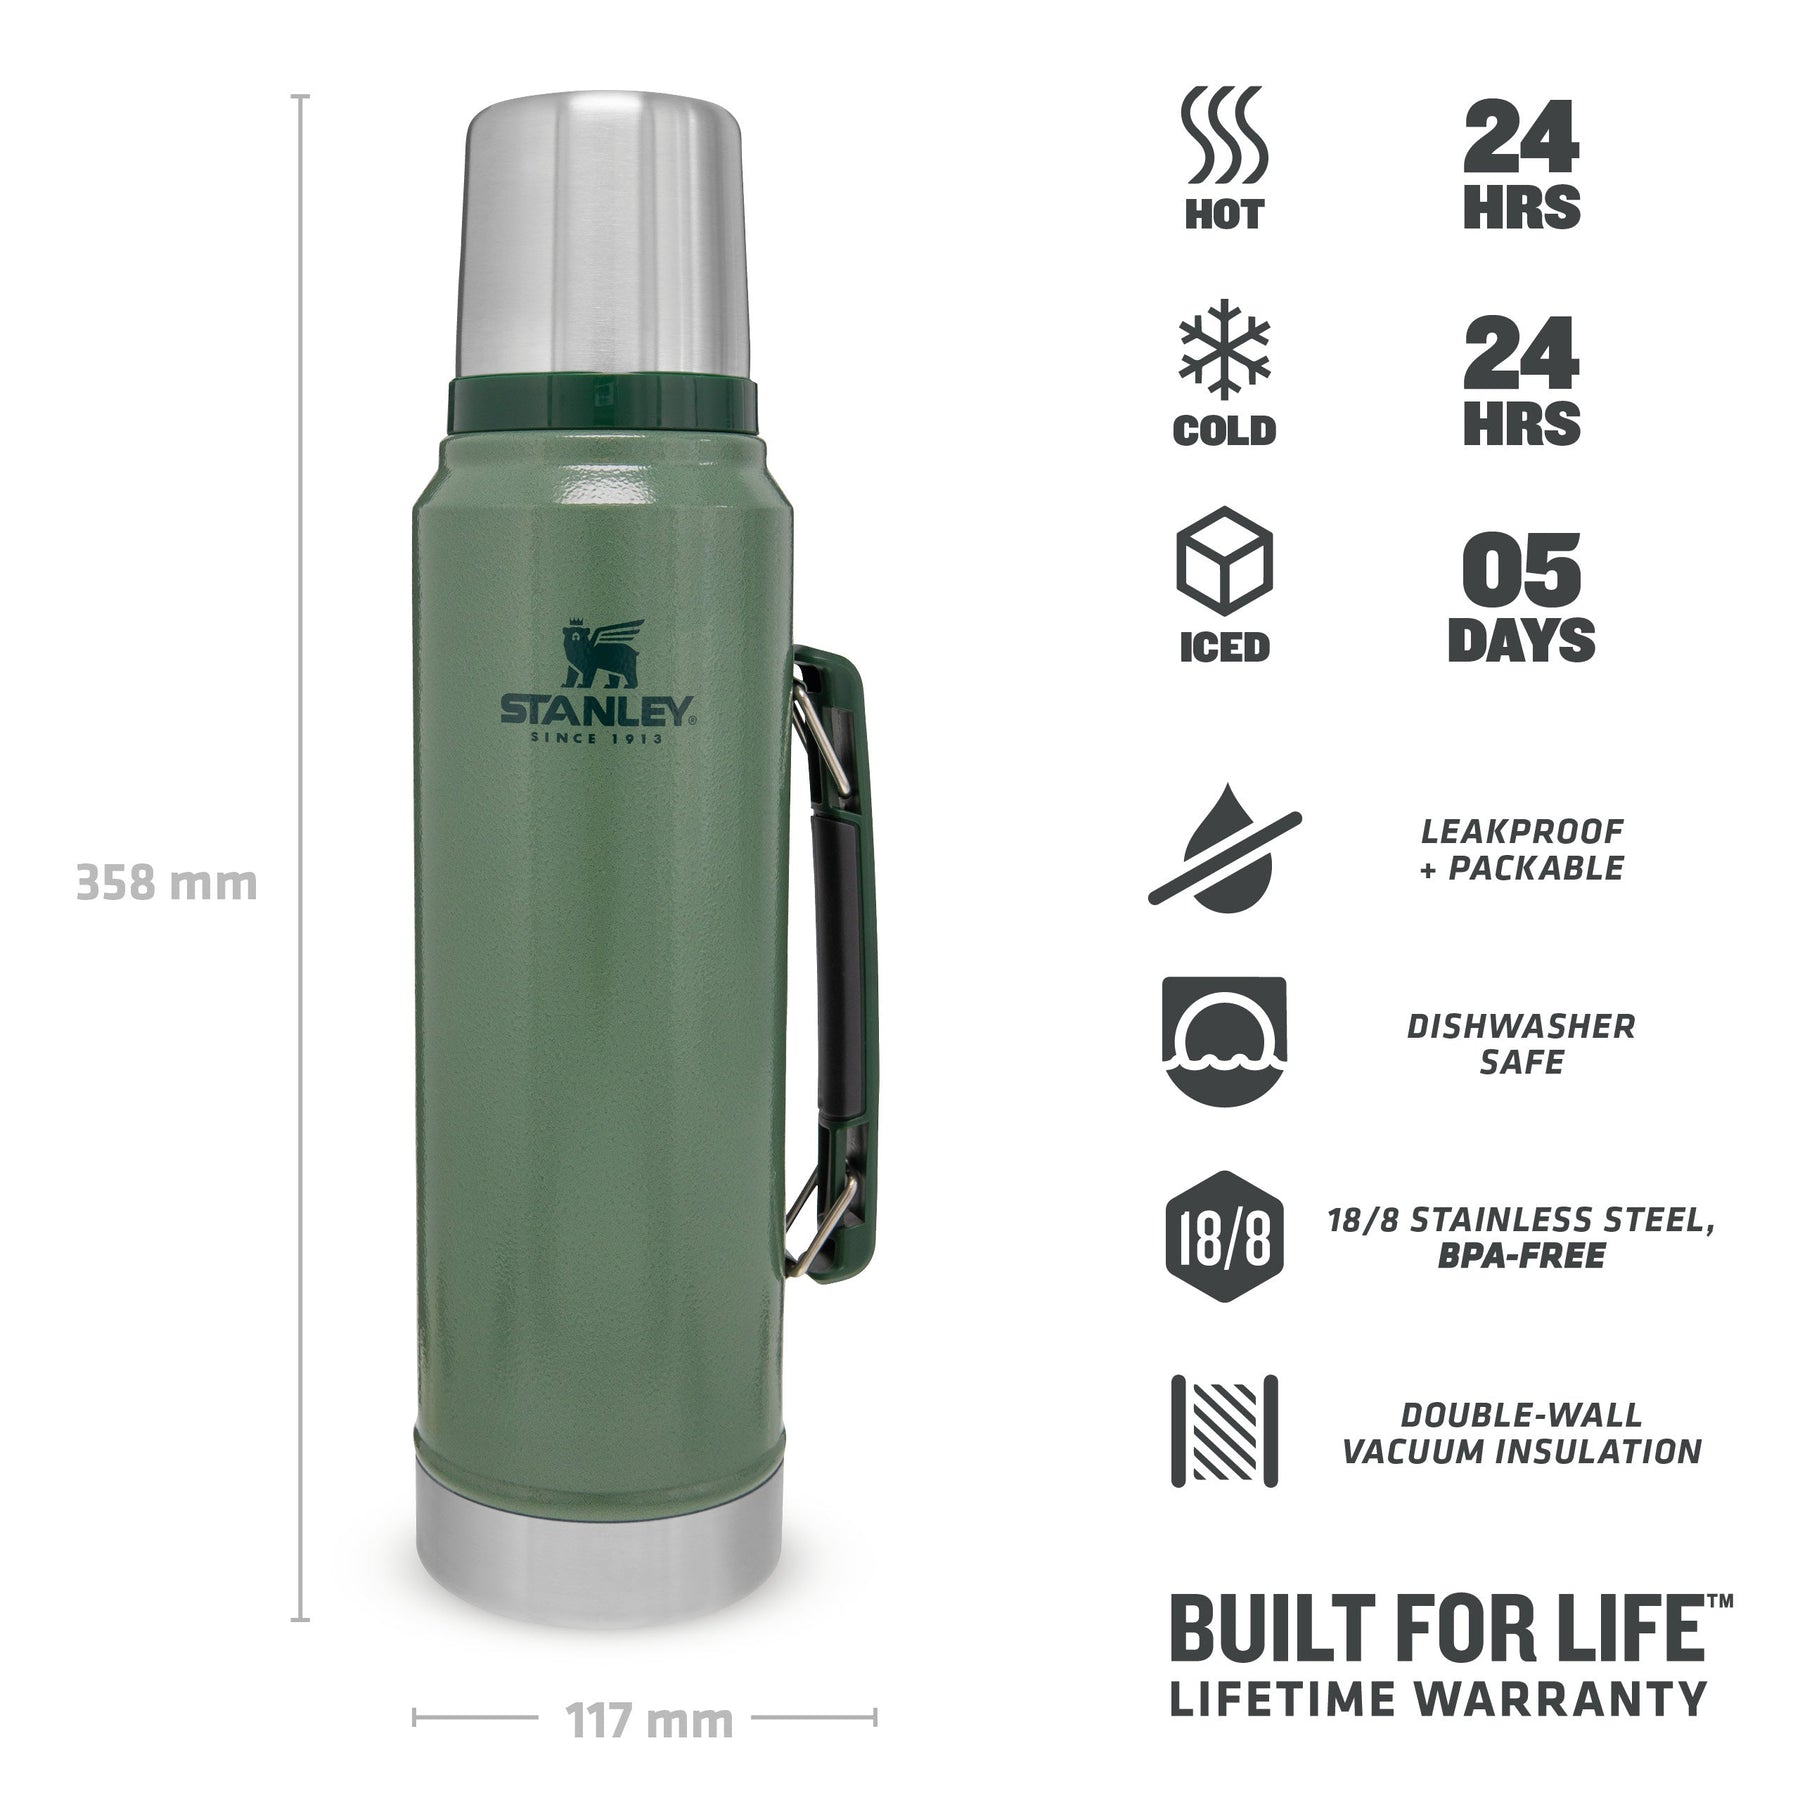 Stanley 1L 1 Liter Vacuum Bottle Thermos w/ SS03 Cup RH95